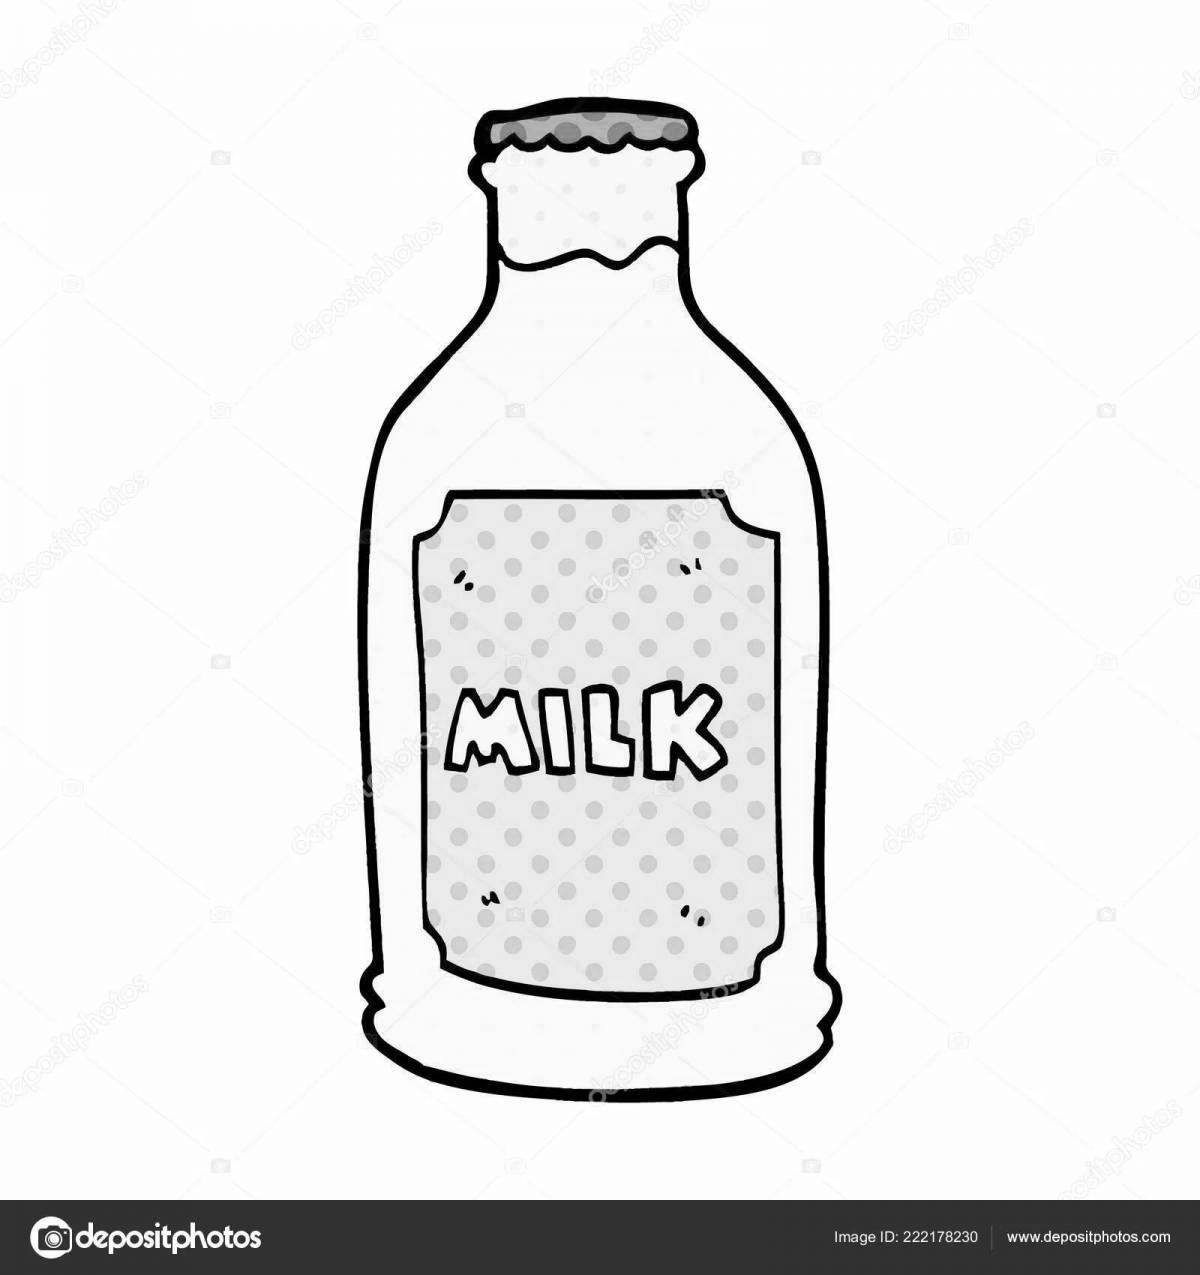 Coloring a bottle of milk in a colored package